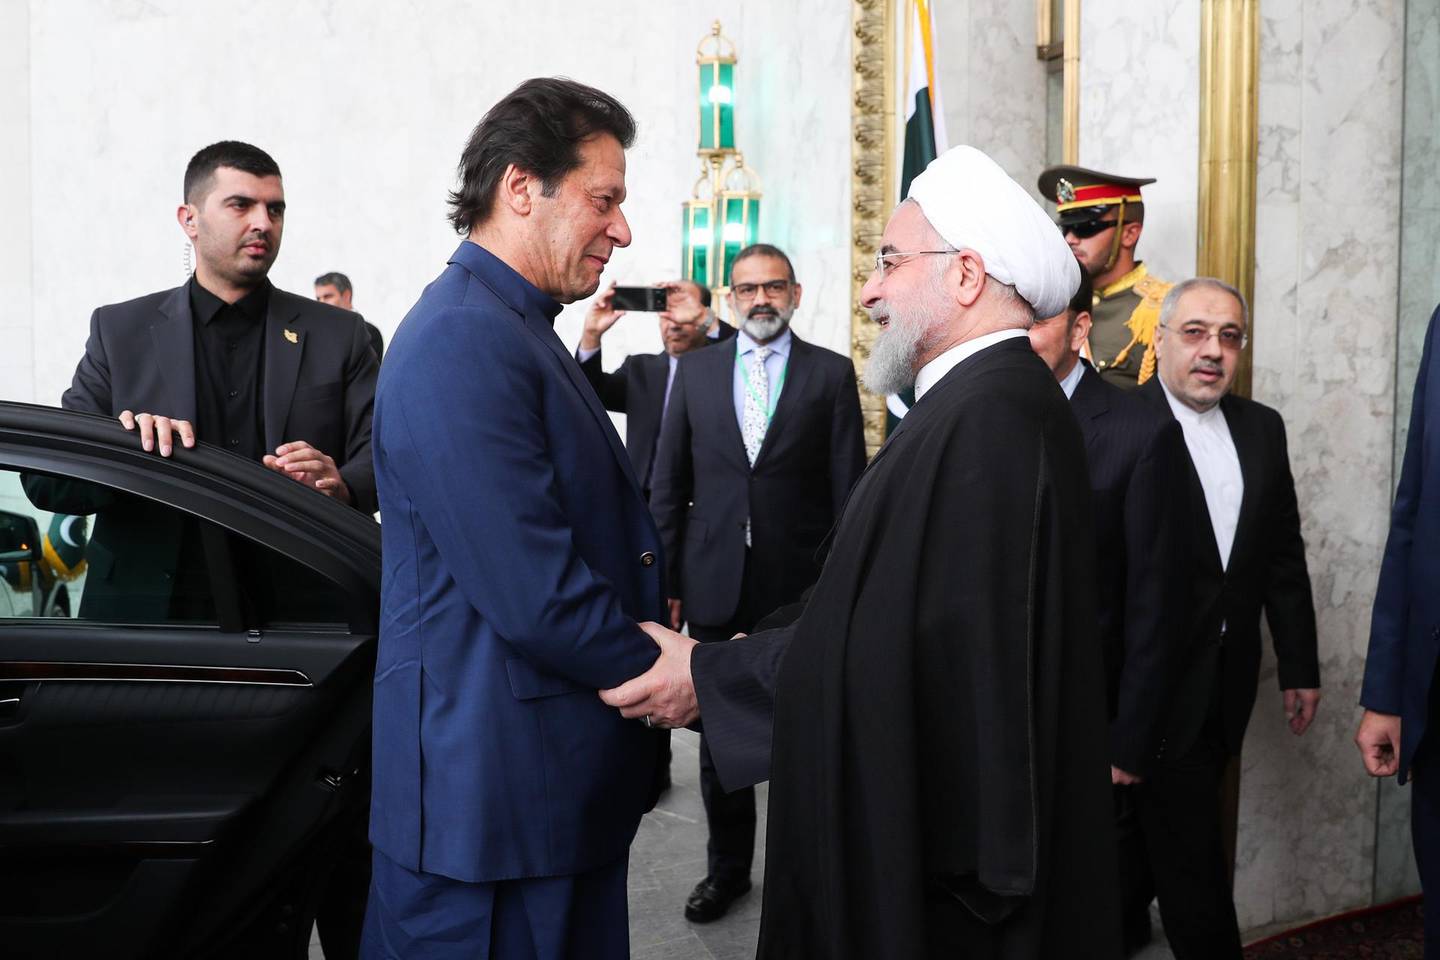 TEHRAN, IRAN - OCTOBER 09: (----EDITORIAL USE ONLY  MANDATORY CREDIT - "IRANIAN PRESIDENCY / HANDOUT" - NO MARKETING NO ADVERTISING CAMPAIGNS - DISTRIBUTED AS A SERVICE TO CLIENTS----) Iranian President Hassan Rouhani (R) welcomes Prime Minister of Pakistan Imran Khan (L) at Sa'dabad Palace Complex in Tehran, Iran on October 13, 2019. (Photo by IRANIAN PRESIDENCY / HANDOUT/Anadolu Agency via Getty Images)